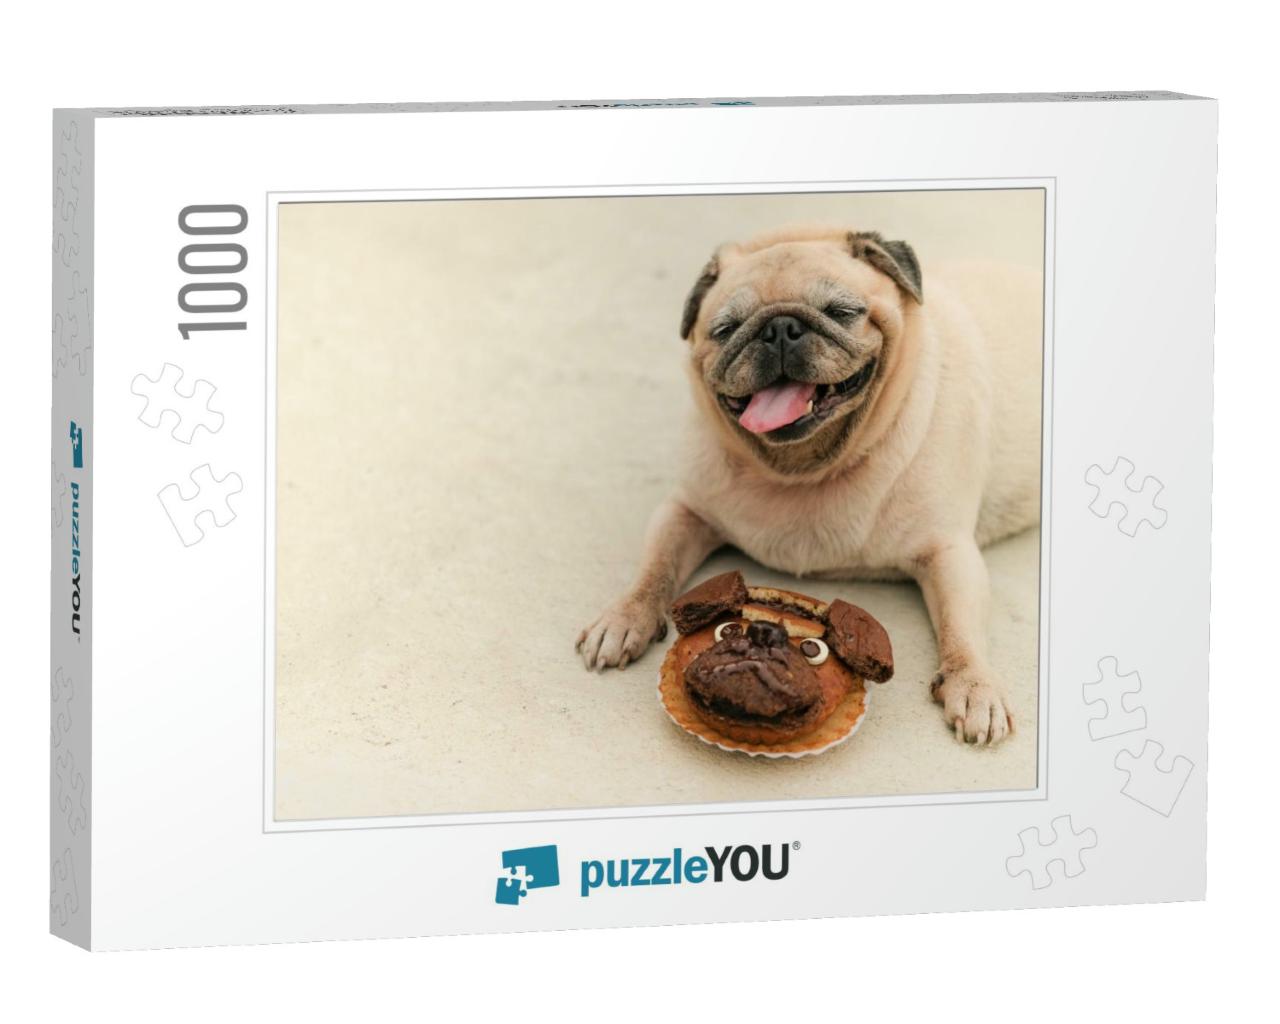 Funny Pug Dog Waiting to Eat Pug Homemade Cake... Jigsaw Puzzle with 1000 pieces